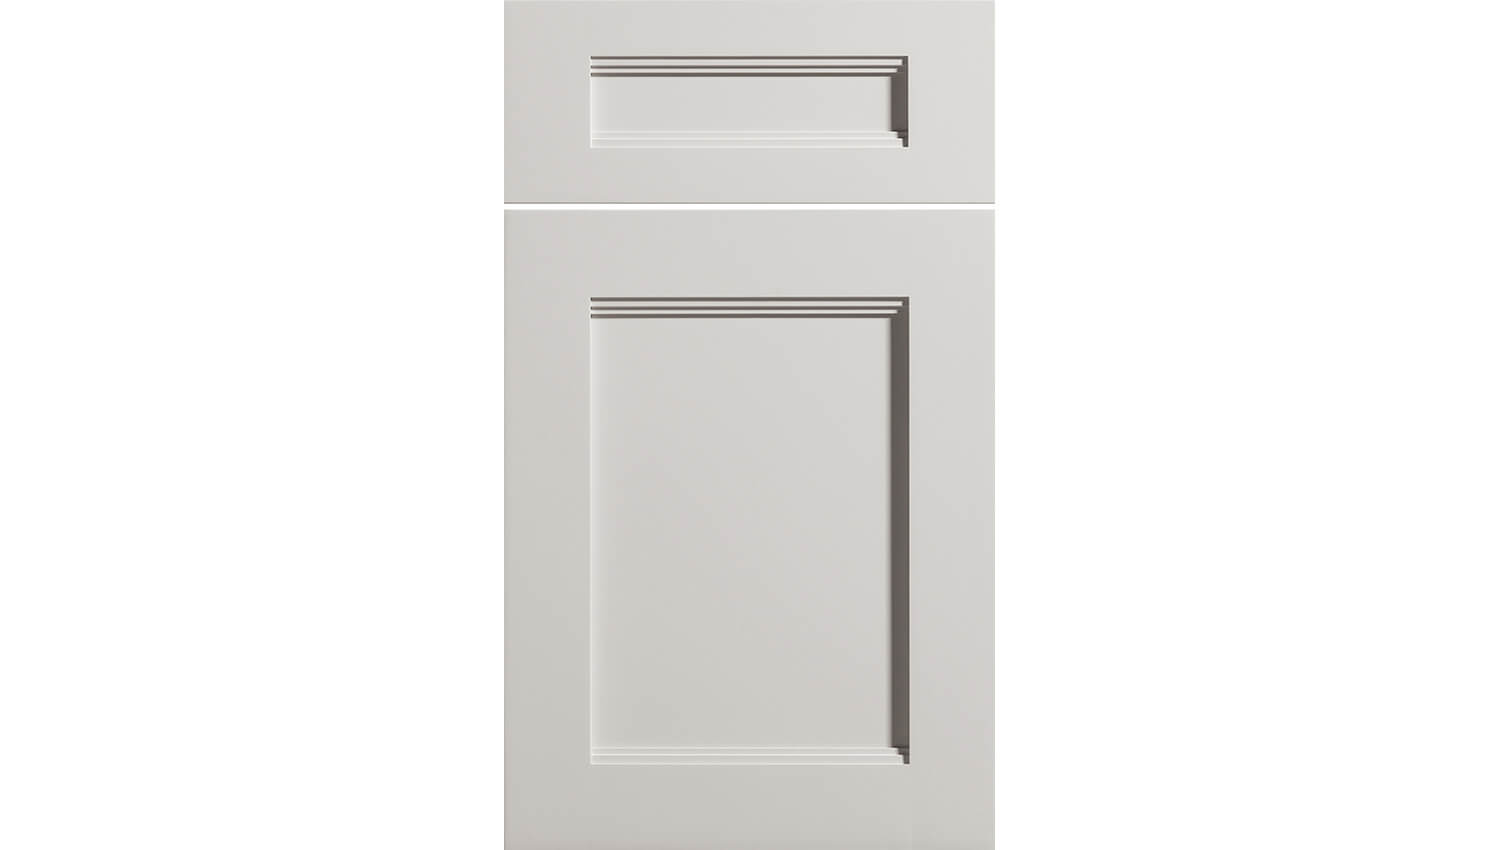 Breckenridge Panel is a sophisticated cabinet door style with a flat panel and horizontal detailing from Dura Supreme Cabinetry.